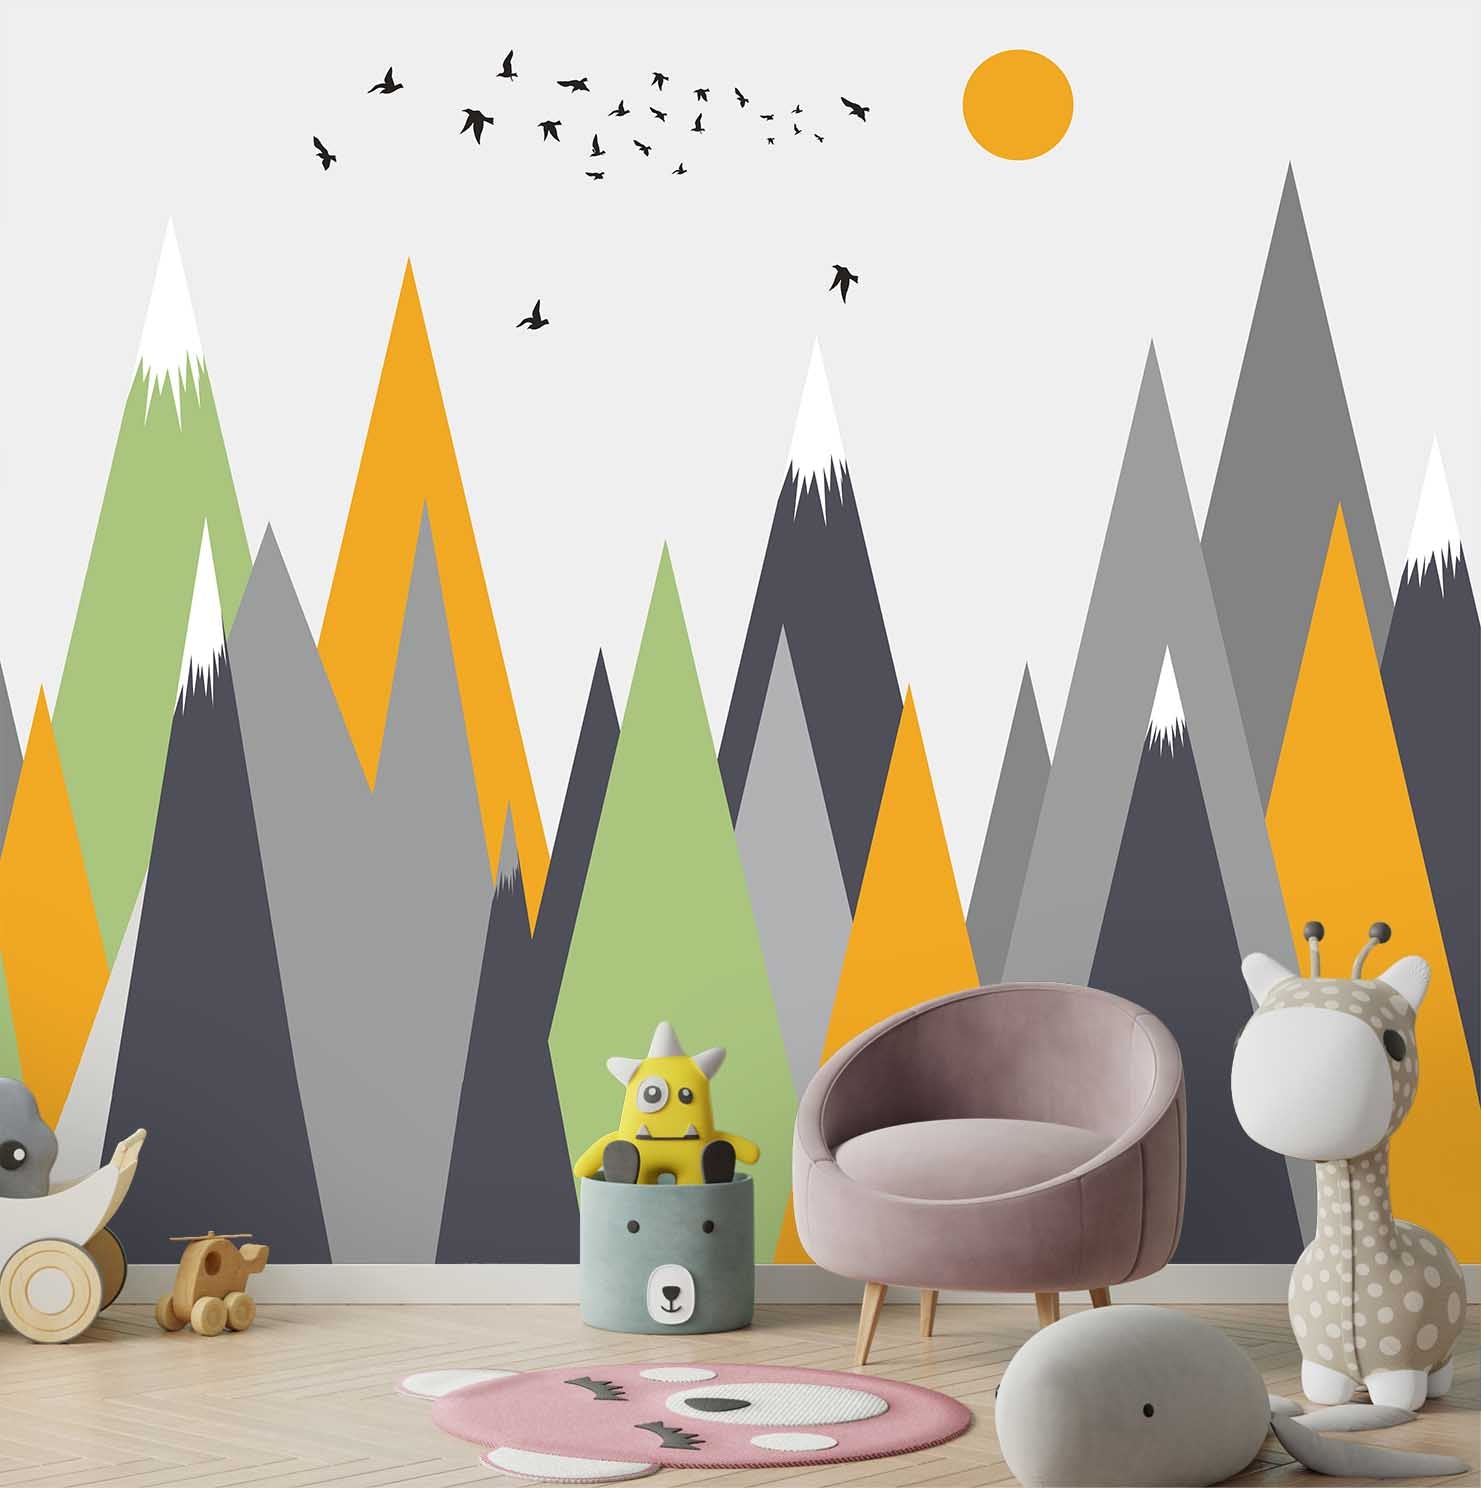 Solid yellow, Grey and Green Mountains theme for Kids room